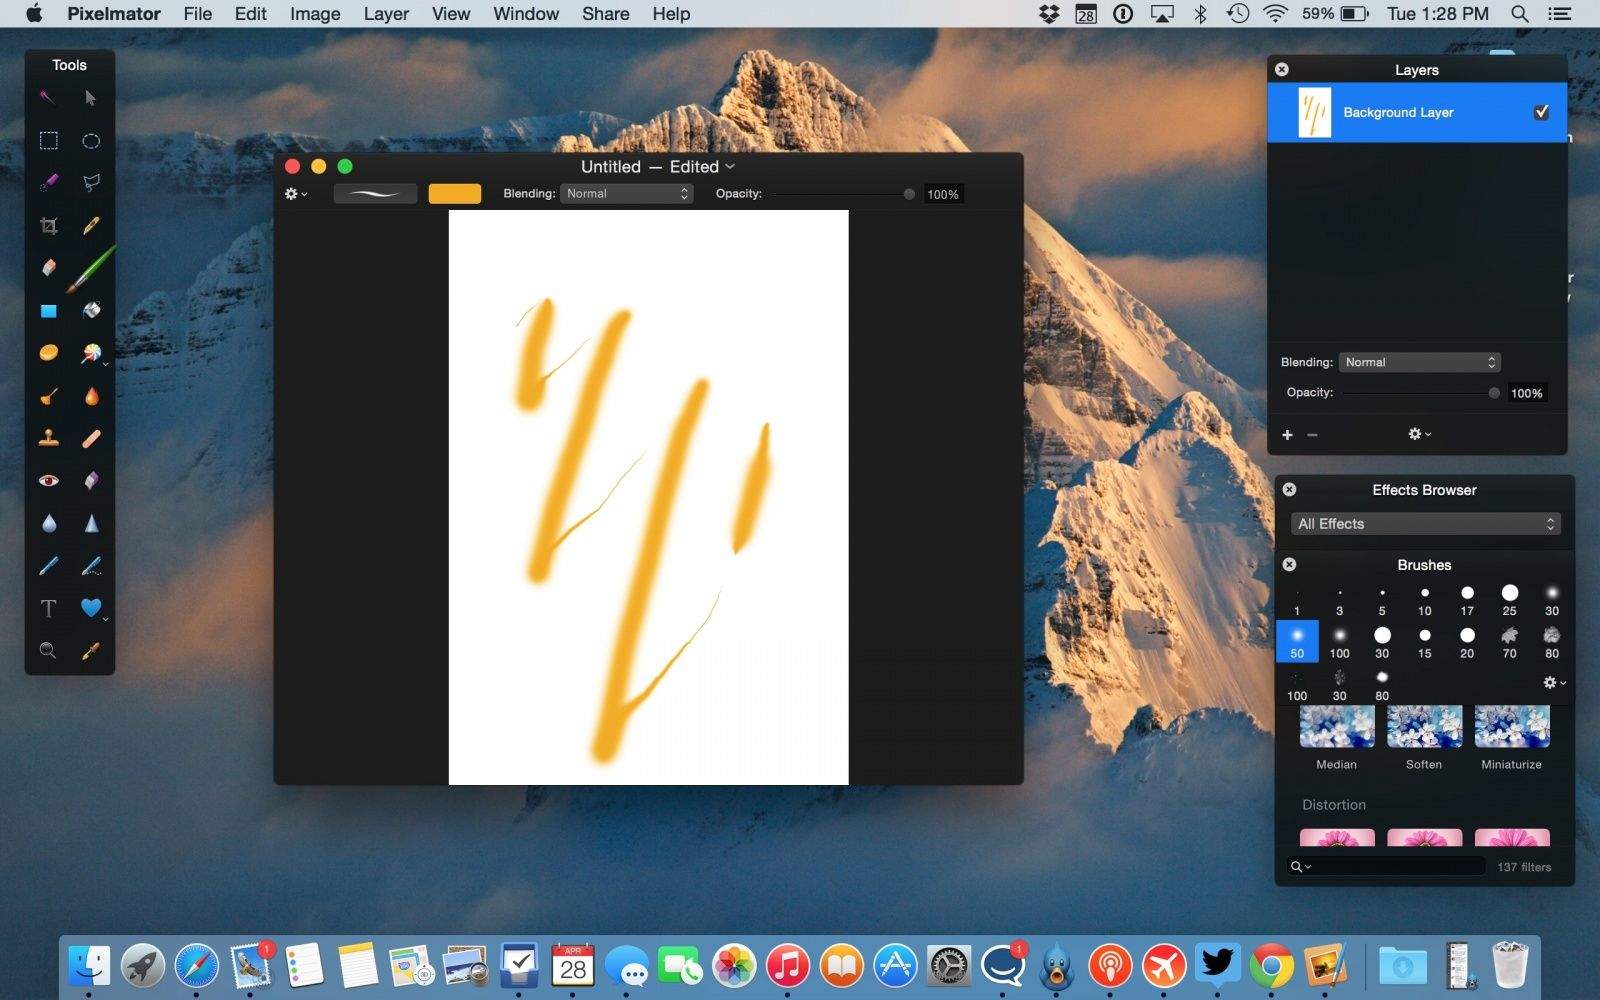 A staple Mac app now supports Apple's new trackpad. Photo: Pixelmator